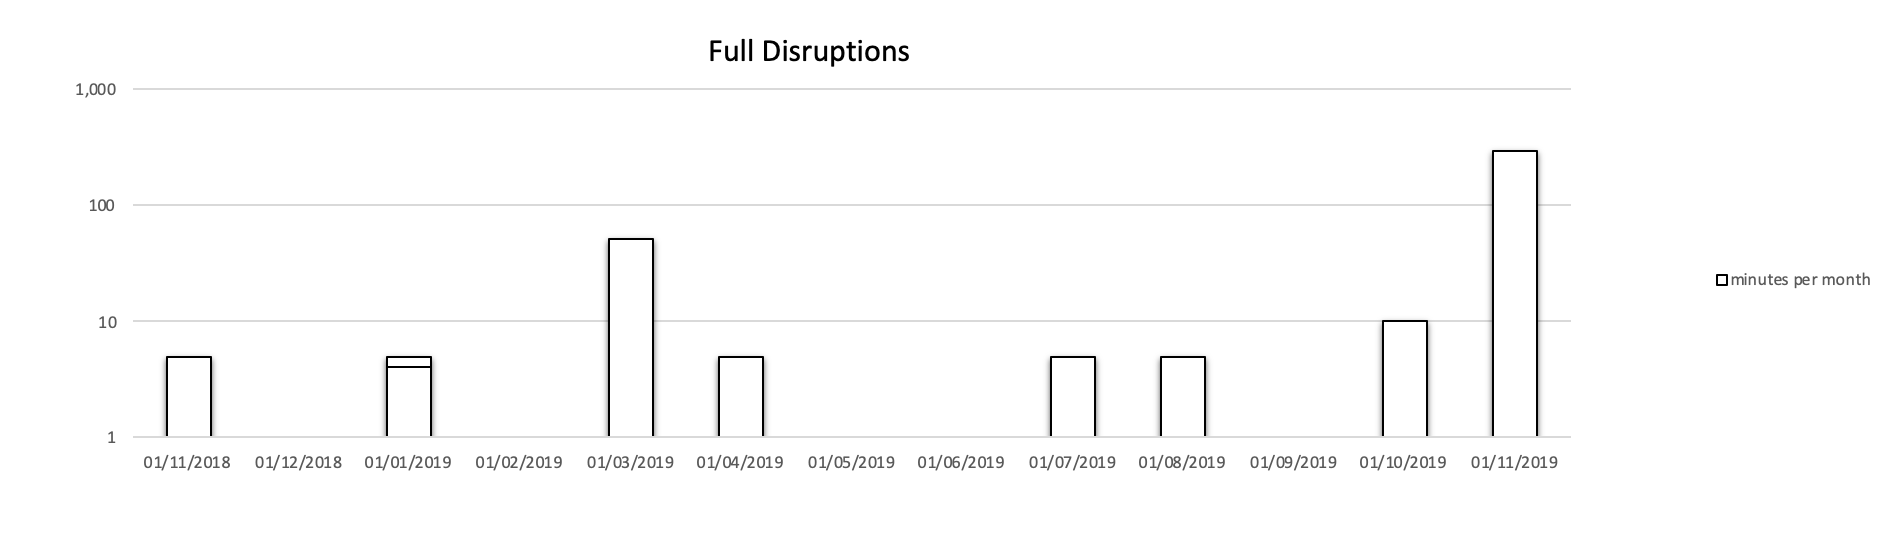 Full Disruptions in minutes (logarithmic scale).